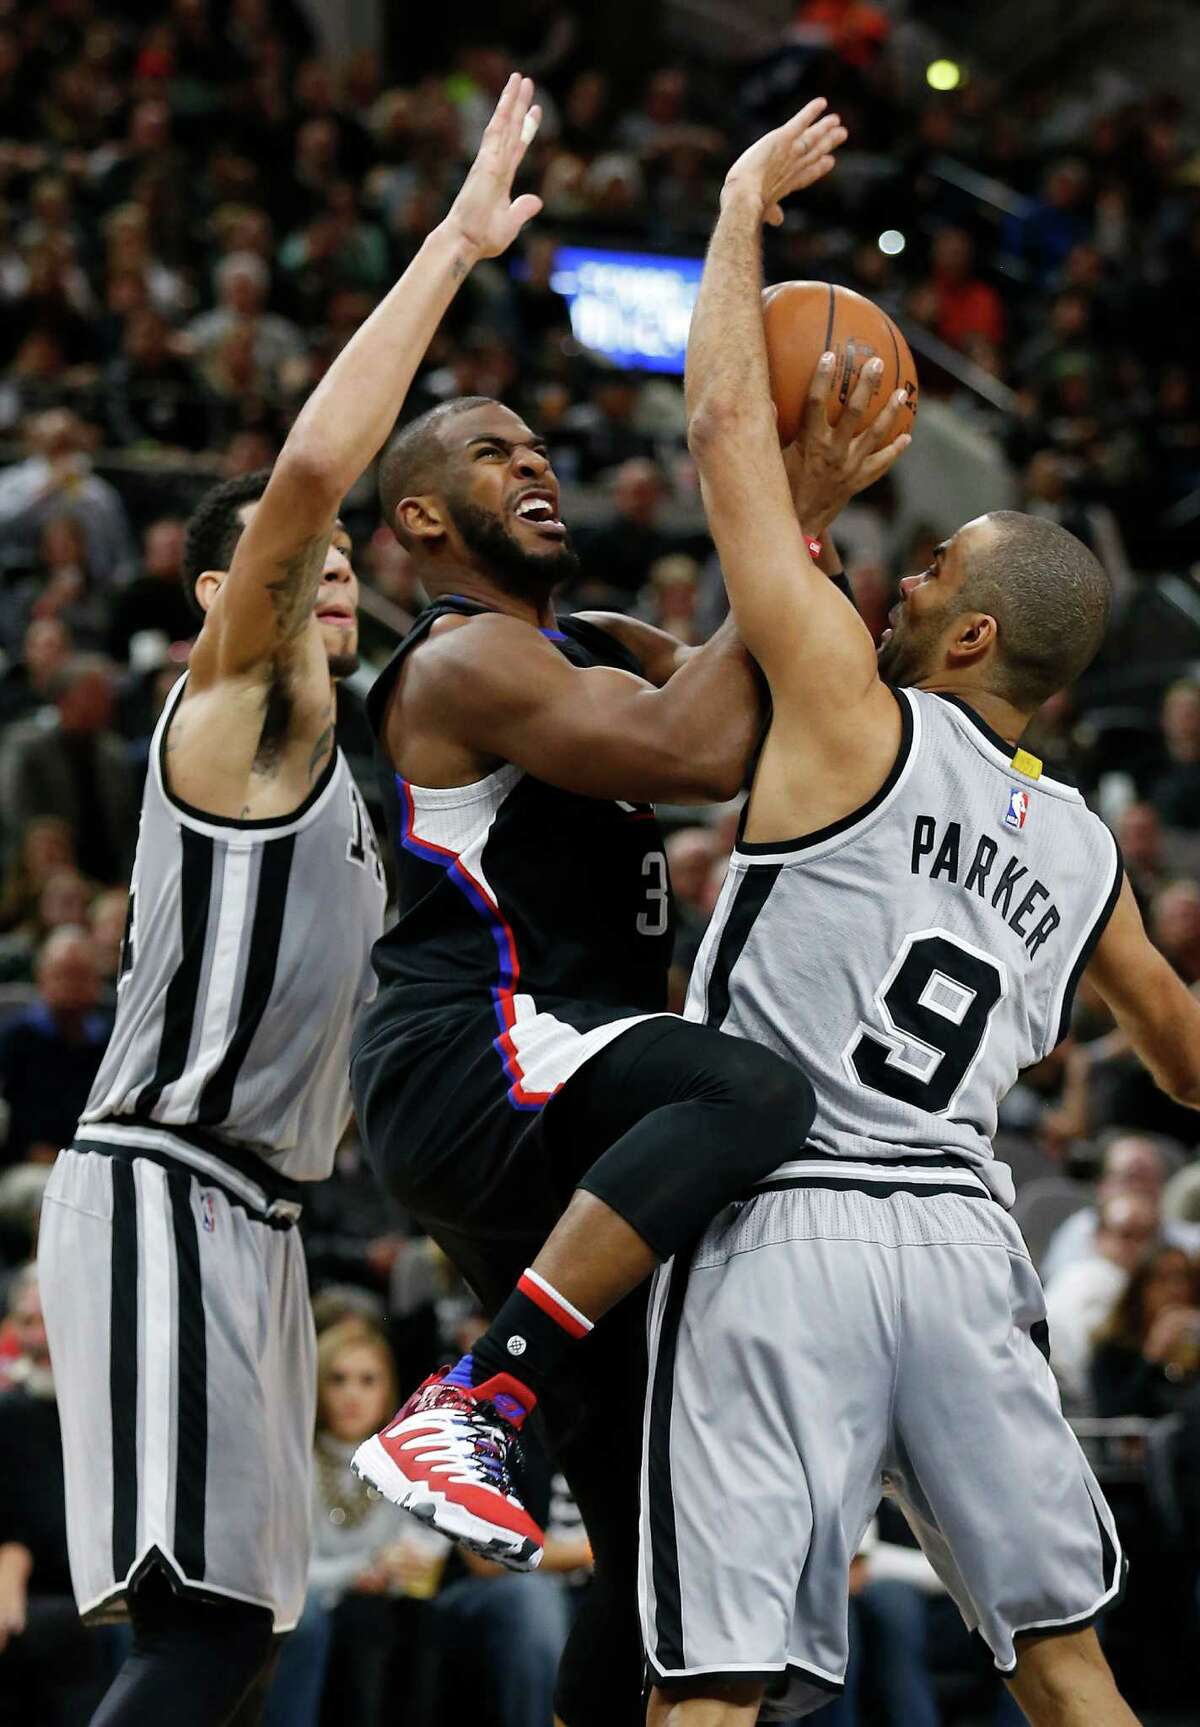 Spurs' Tony Parker (09) and Danny Green (14) pressure Clippers' Chris Paul (03) at the AT&T Center on Friday, Dec. 18, 2015. (Kin Man Hui/San Antonio Express-News)